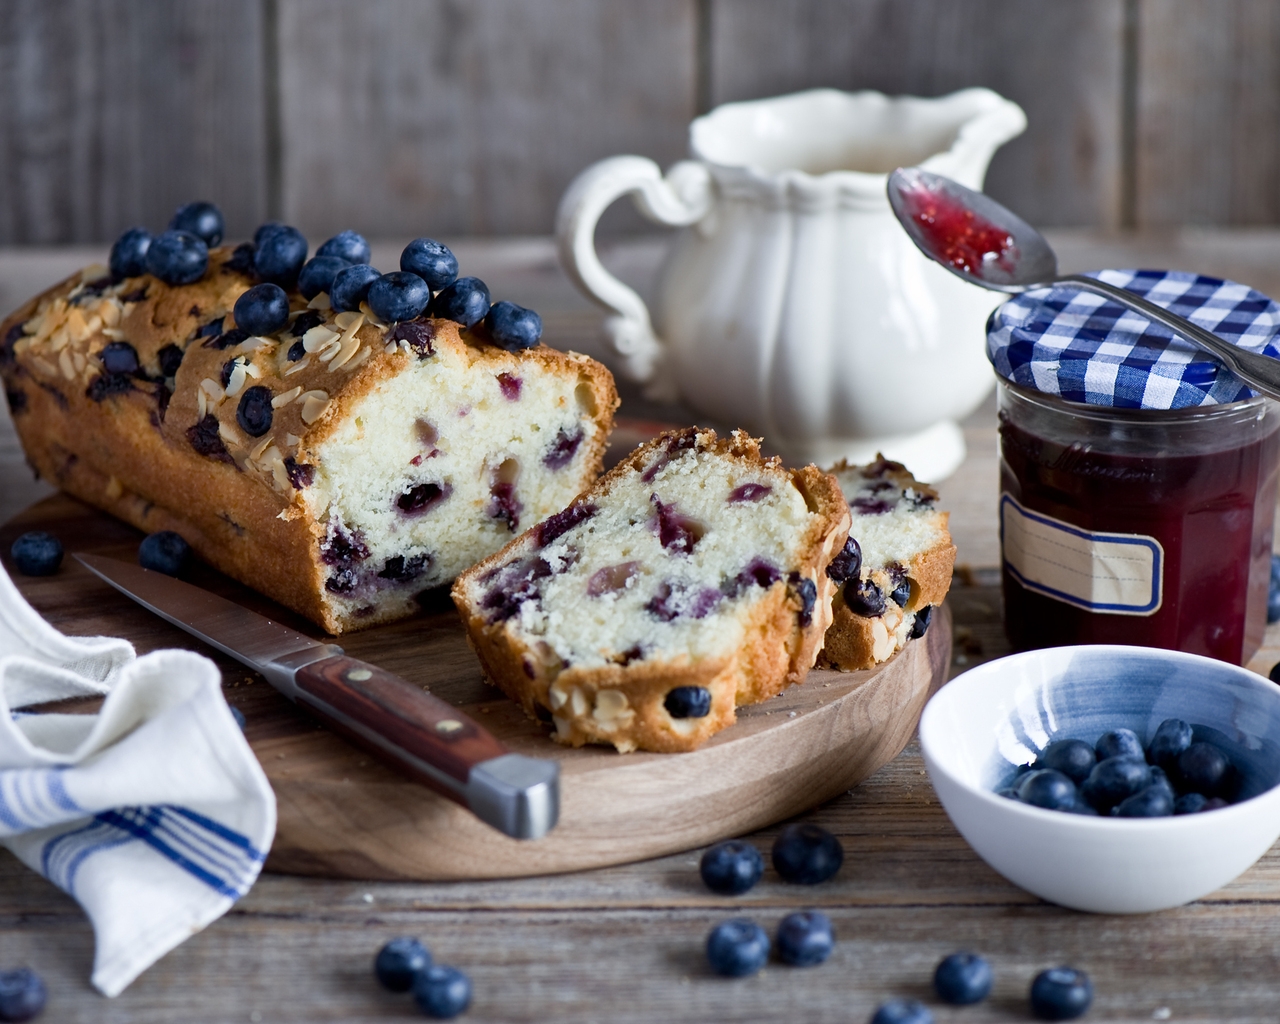 Blueberries Cake for 1280 x 1024 resolution